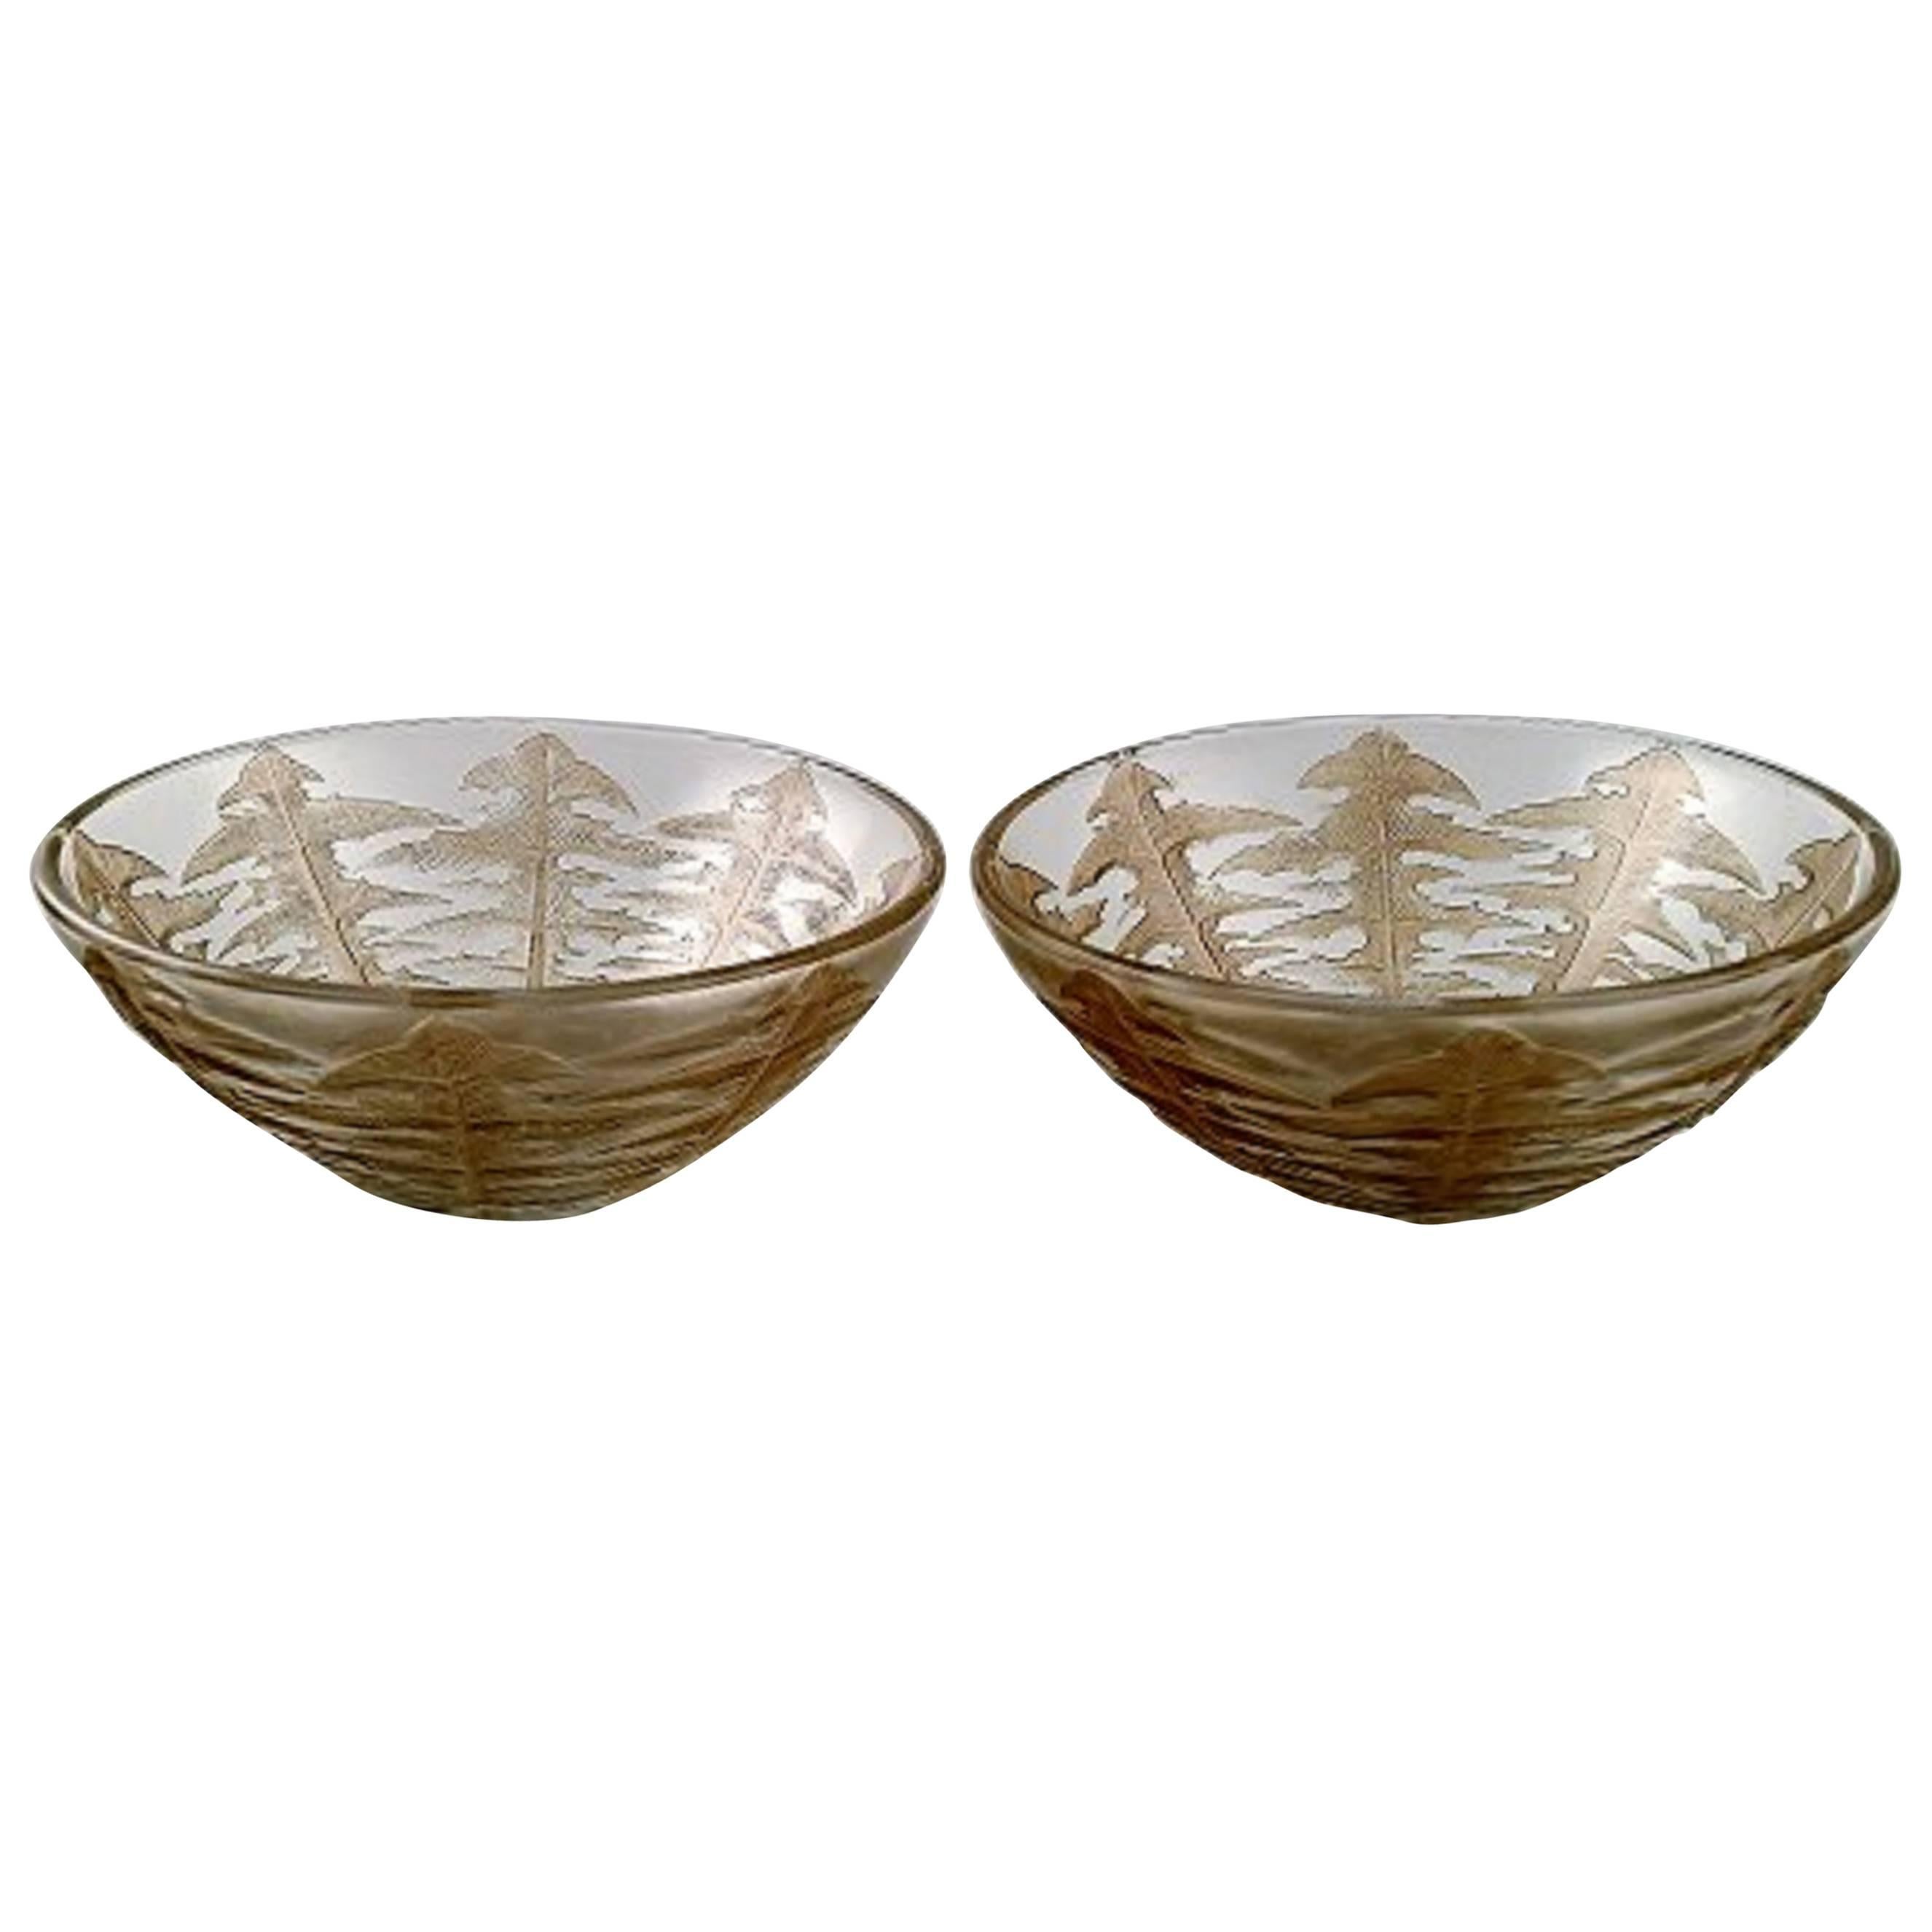 Pair of Early Art Deco Lalique Art Glass Bowls